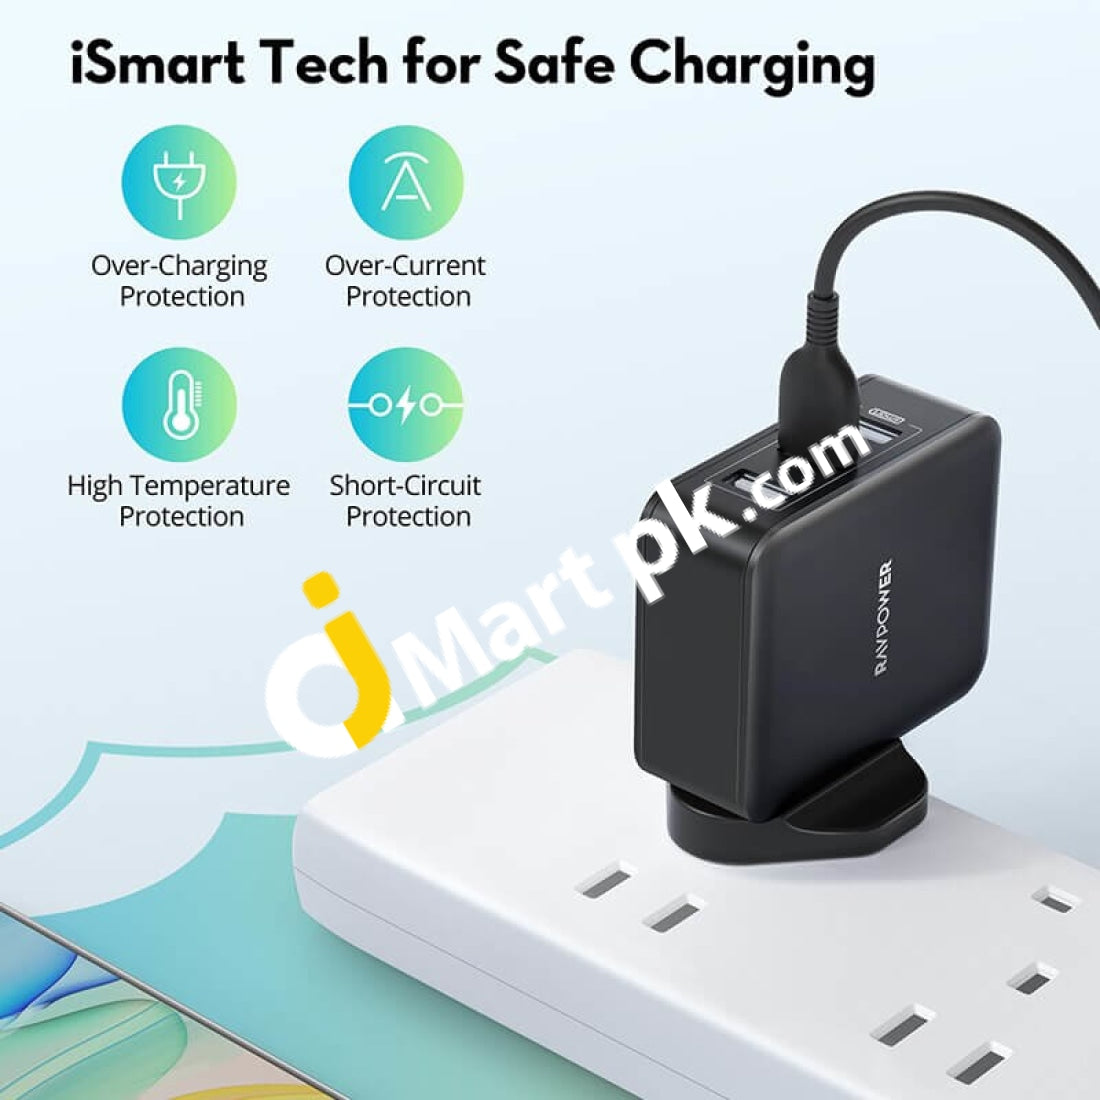 Ravpower 30W 3 Port Usb Wall Charger With Fast Charging Technology Uk Plug - Imported From